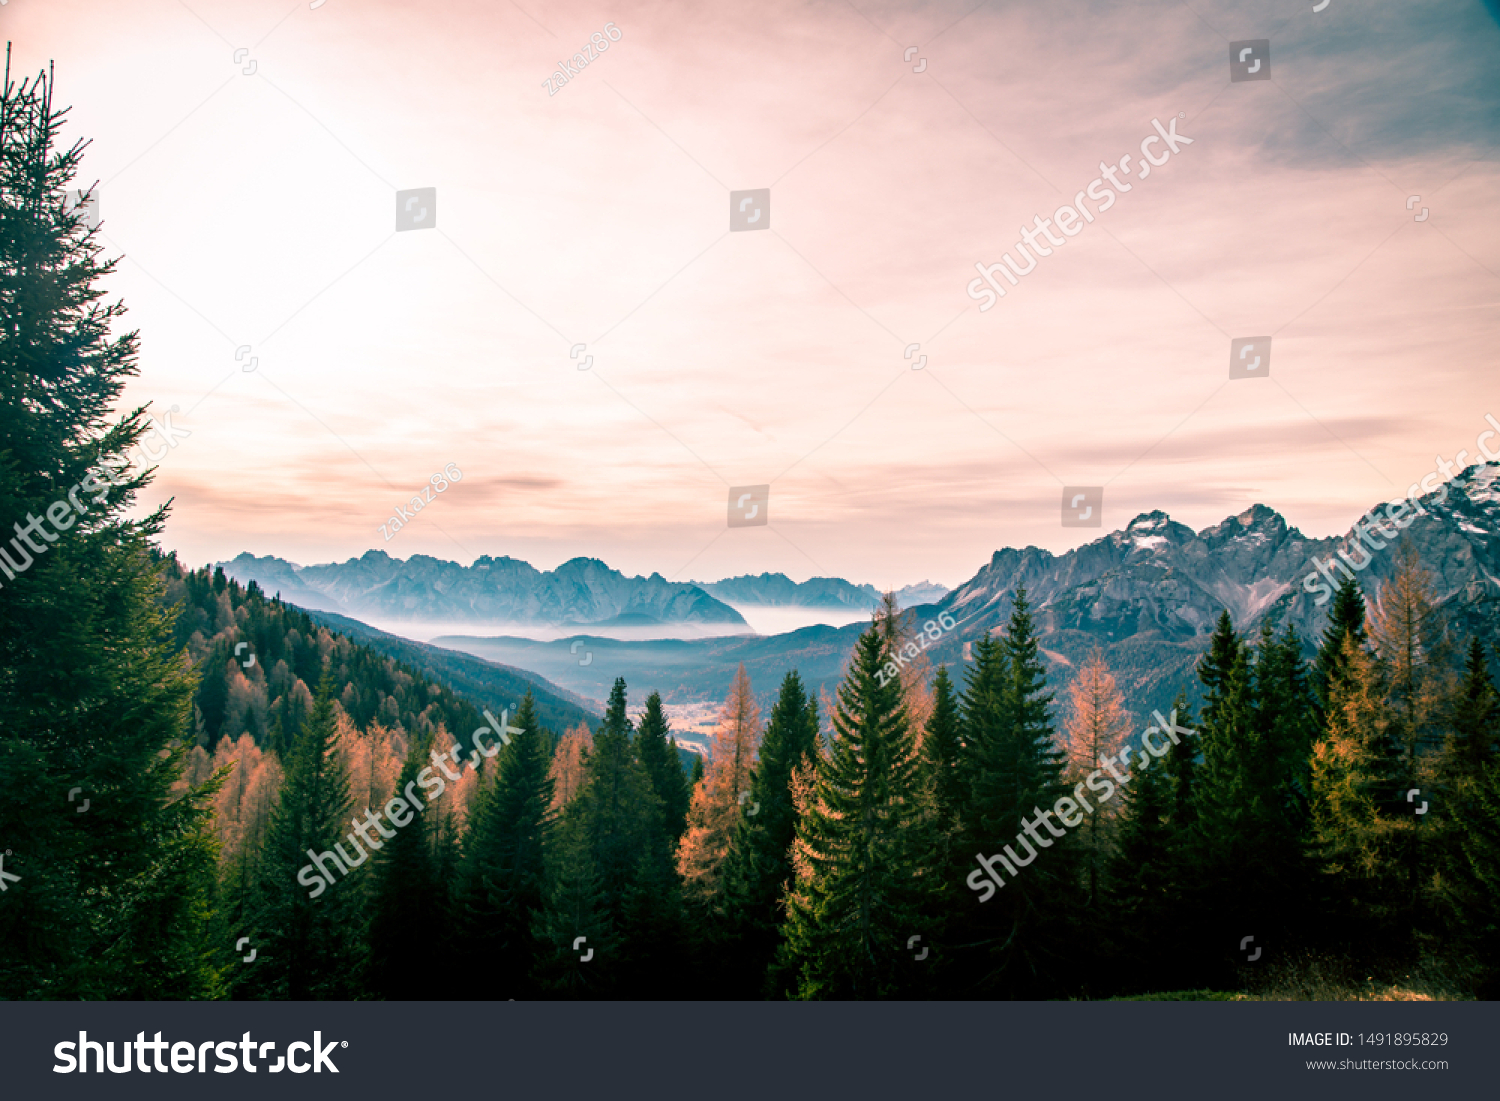 Fall is coming in the italian alps #1491895829